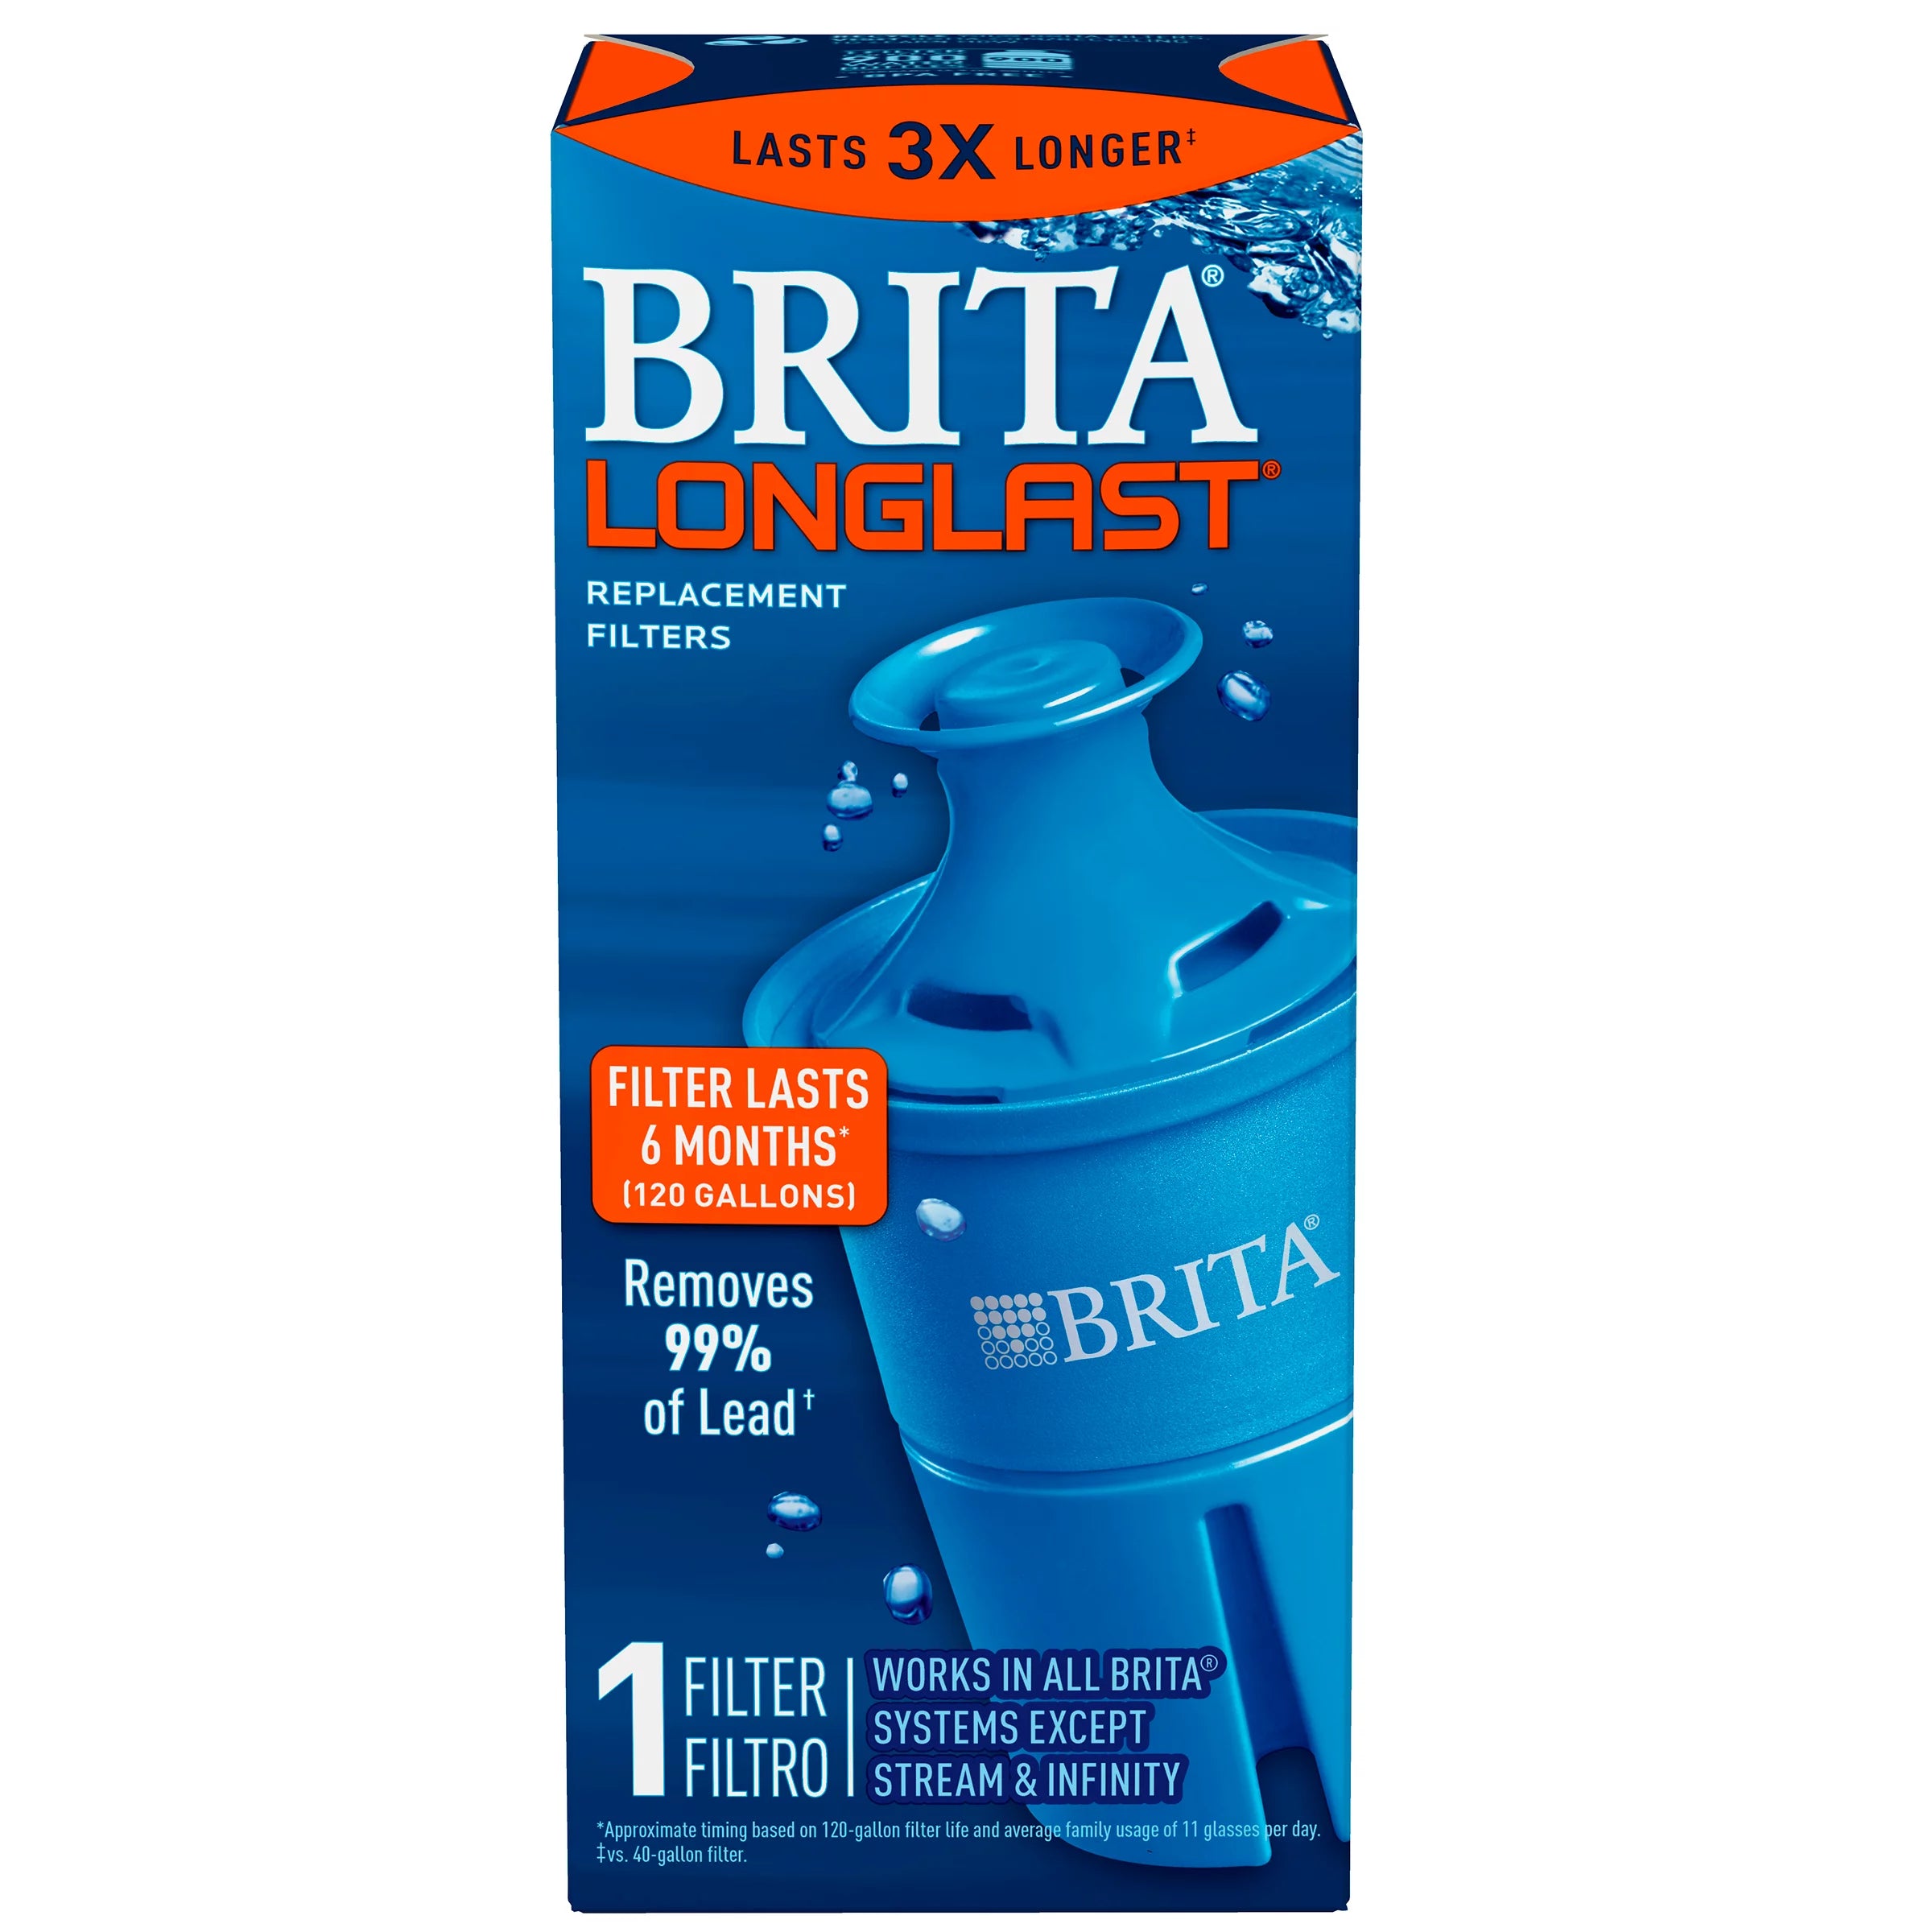 Class Action Lawsuit Claims Brita Is Misleading Customers